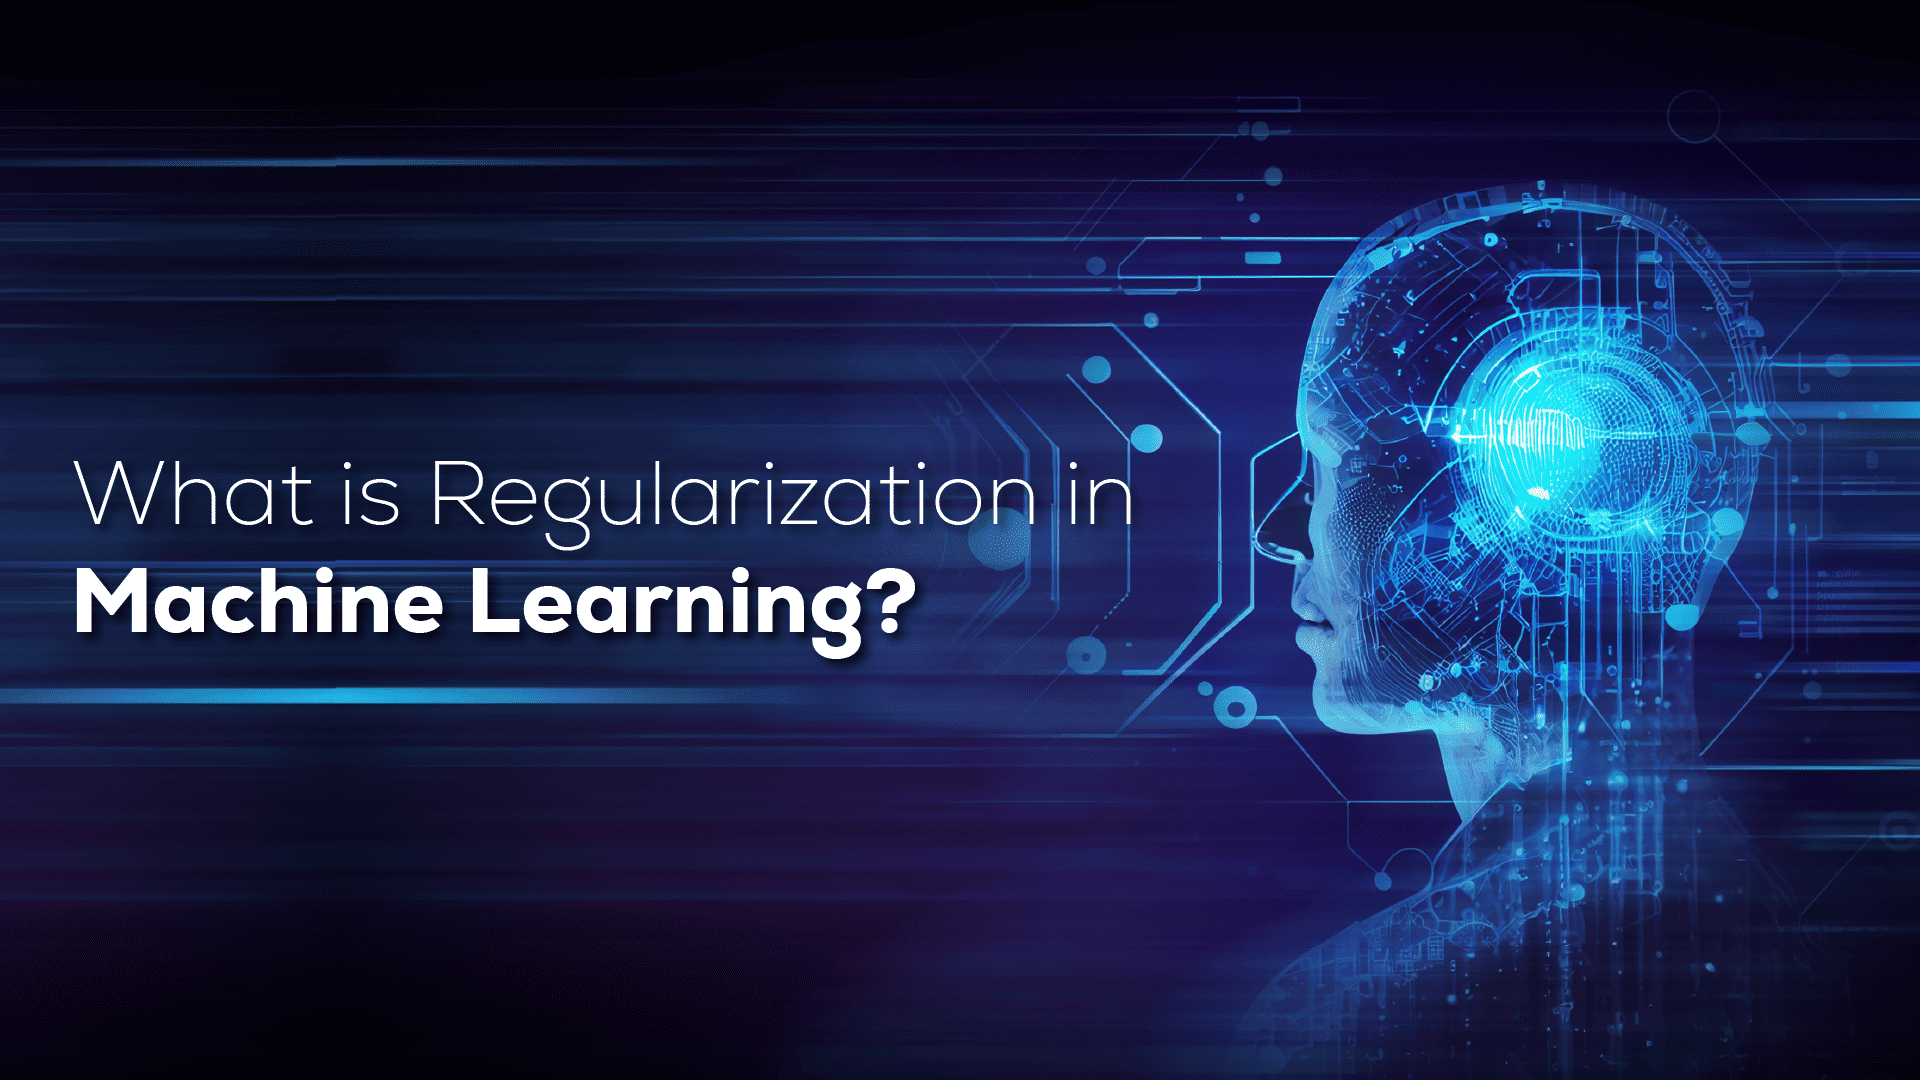 What is Regularization in Machine Learning?